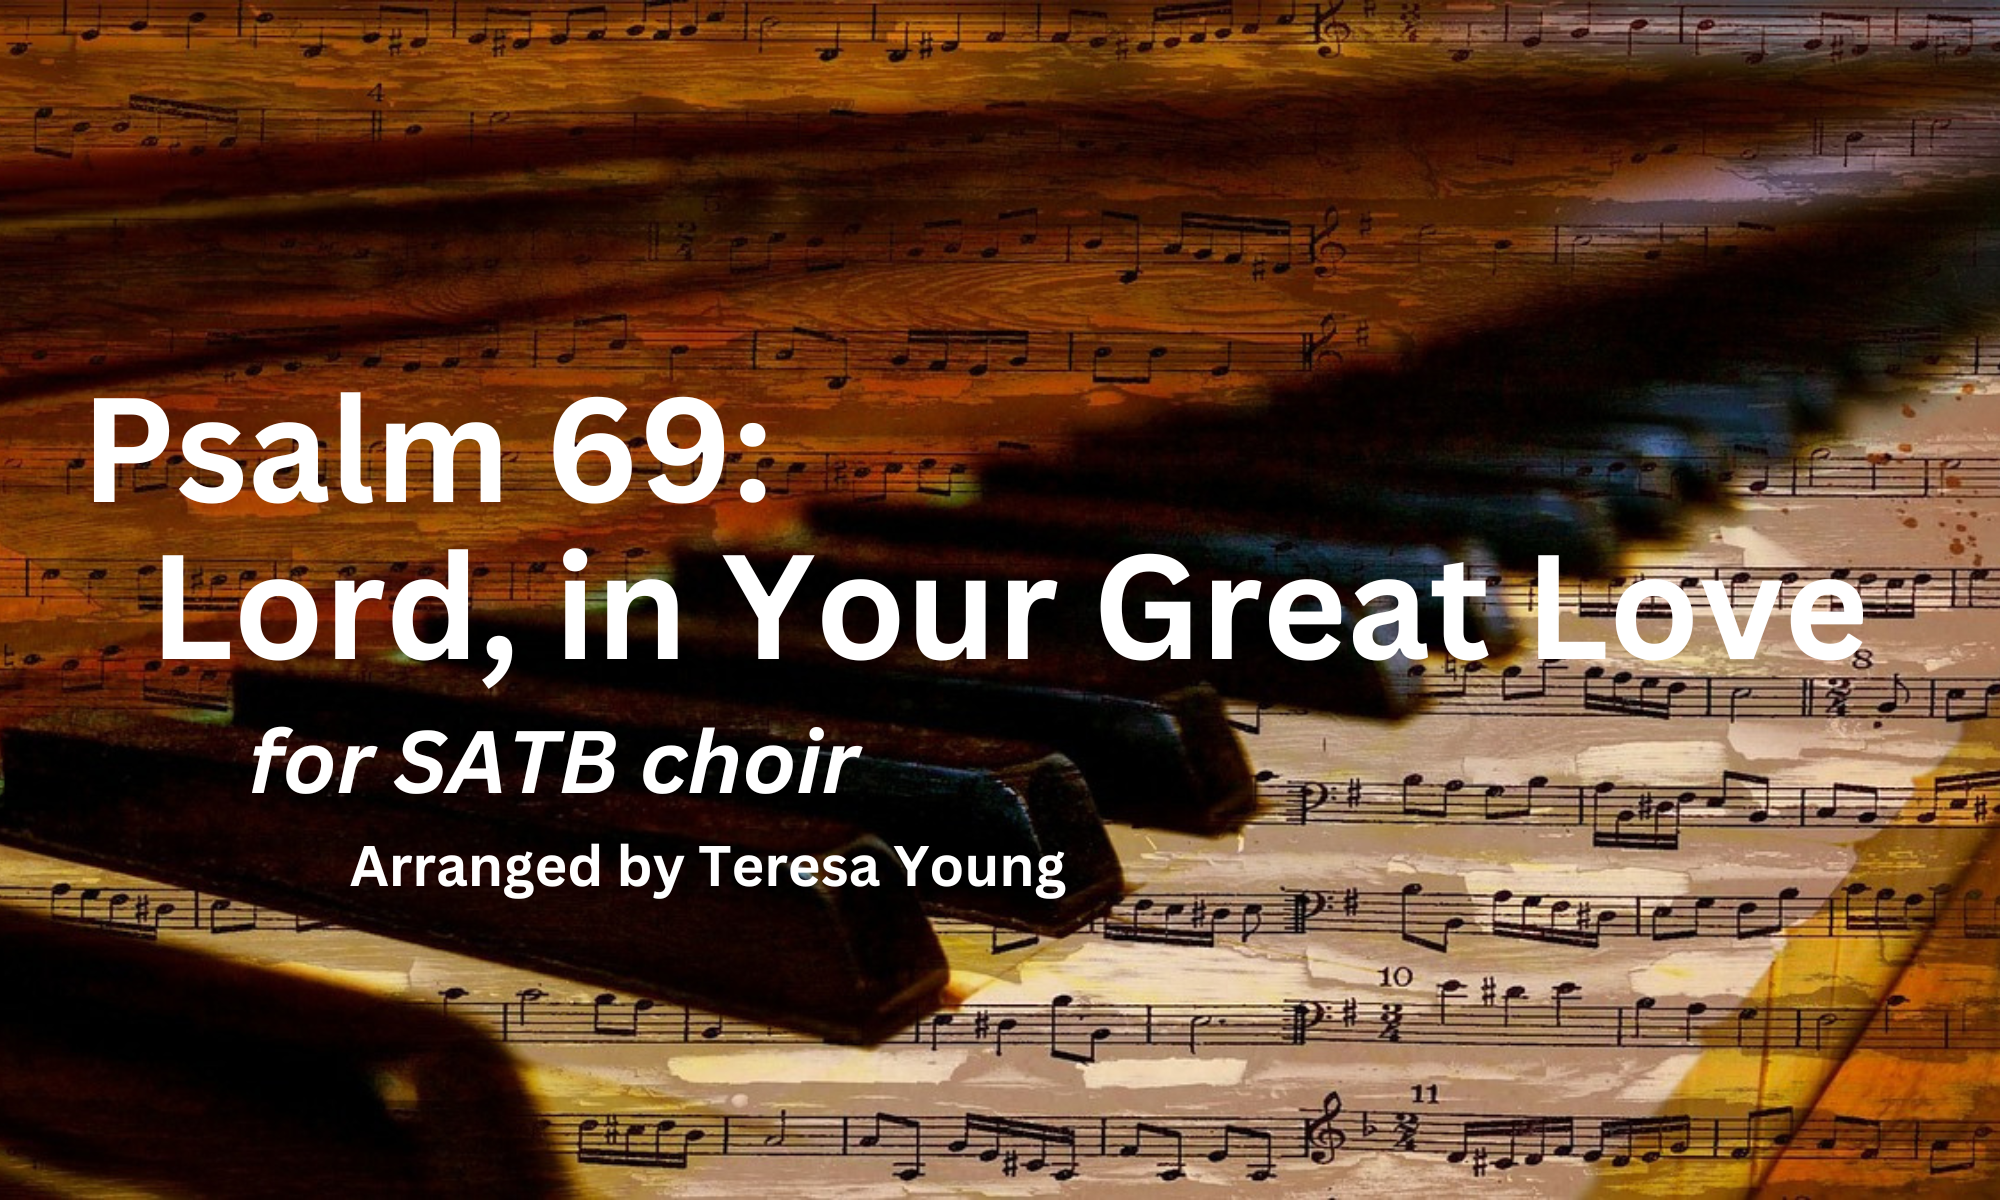 Psalm 69, Lord in Your Great Love, for SATB choir by Teresa Young